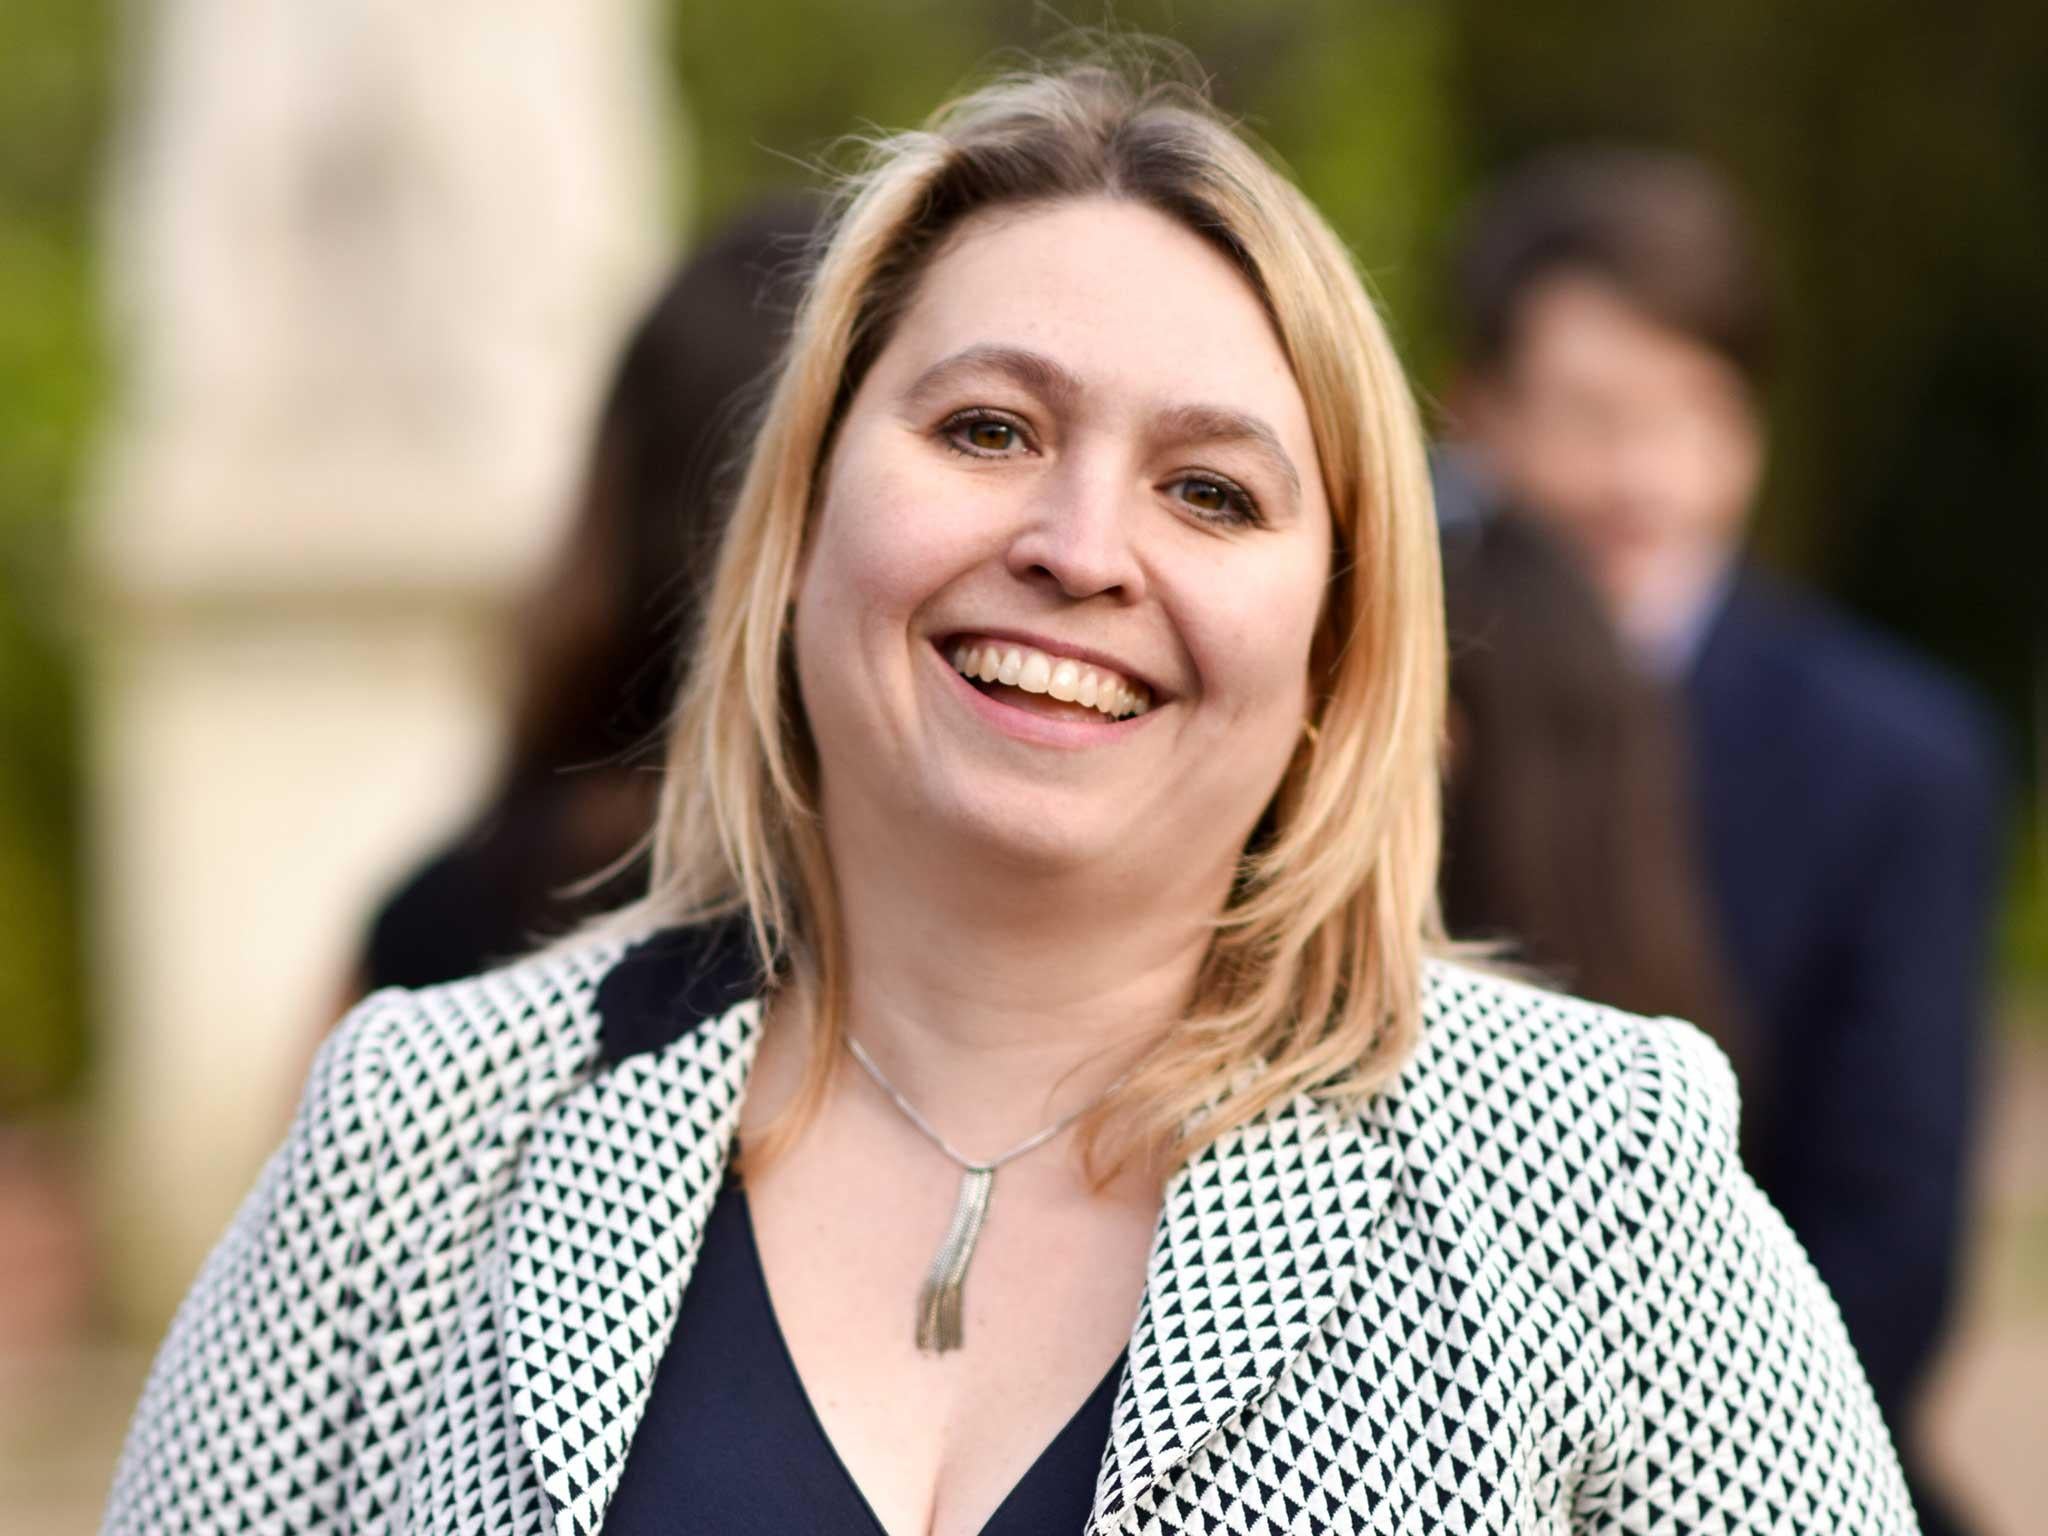 Culture Secretary Karen Bradley will not decide on the future for press regulation until a new consultation has concluded next year